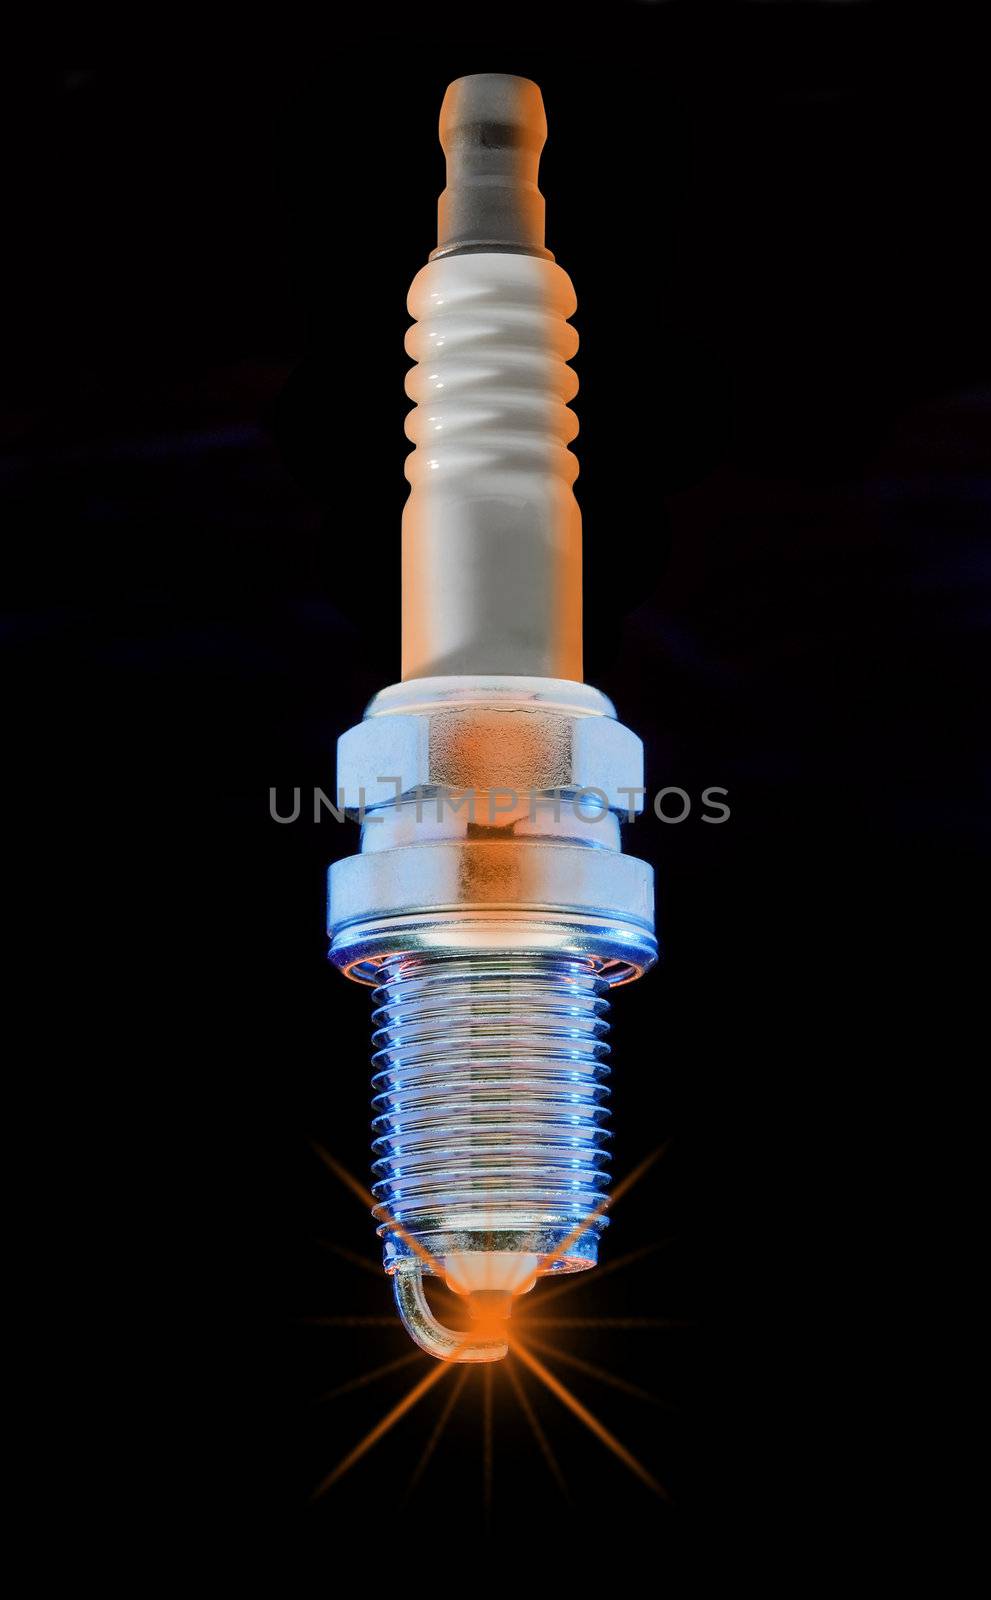 spark plug on a black background in blues and orange